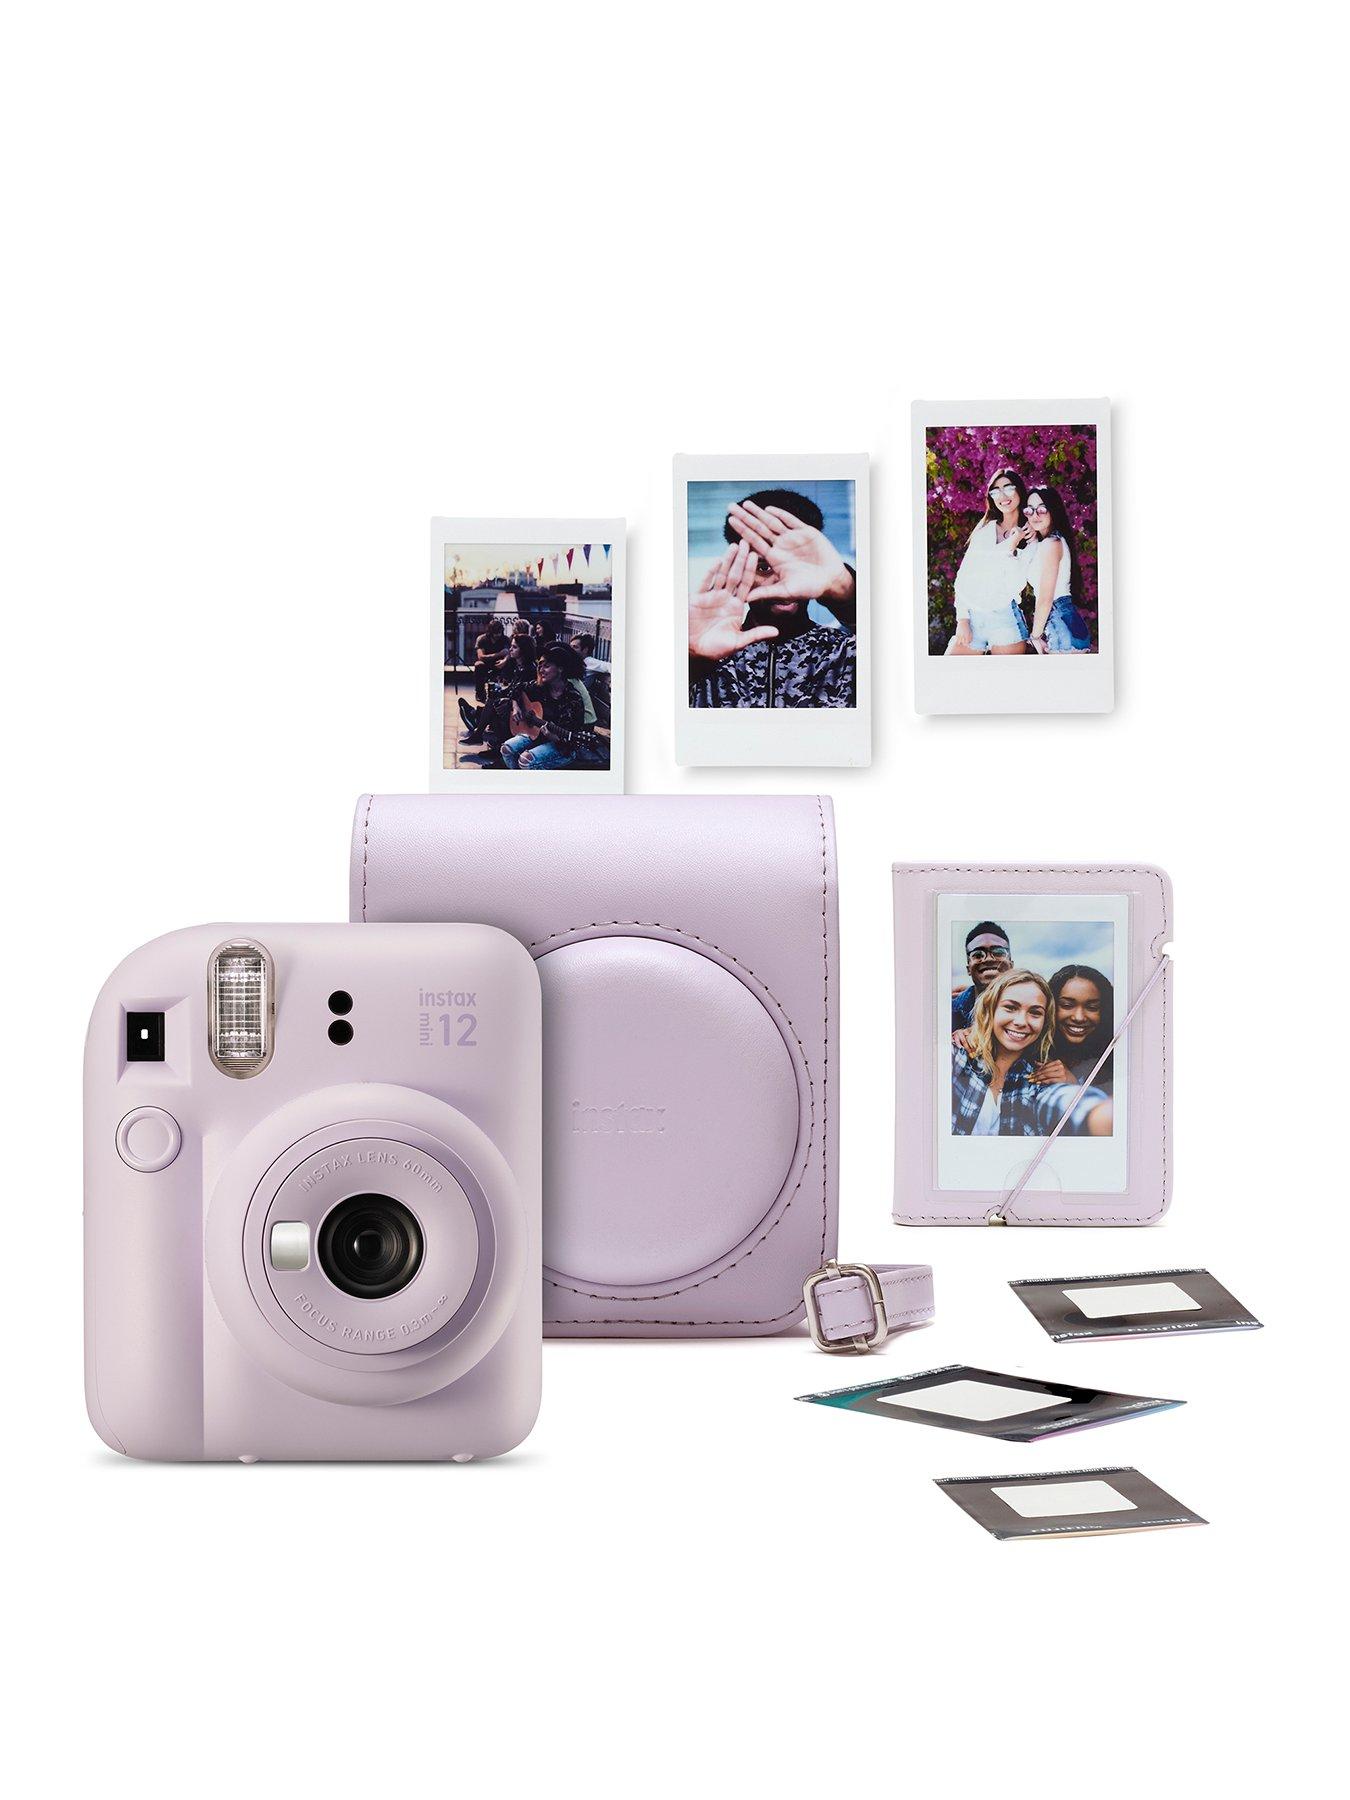 Instant Photo Cameras That Print